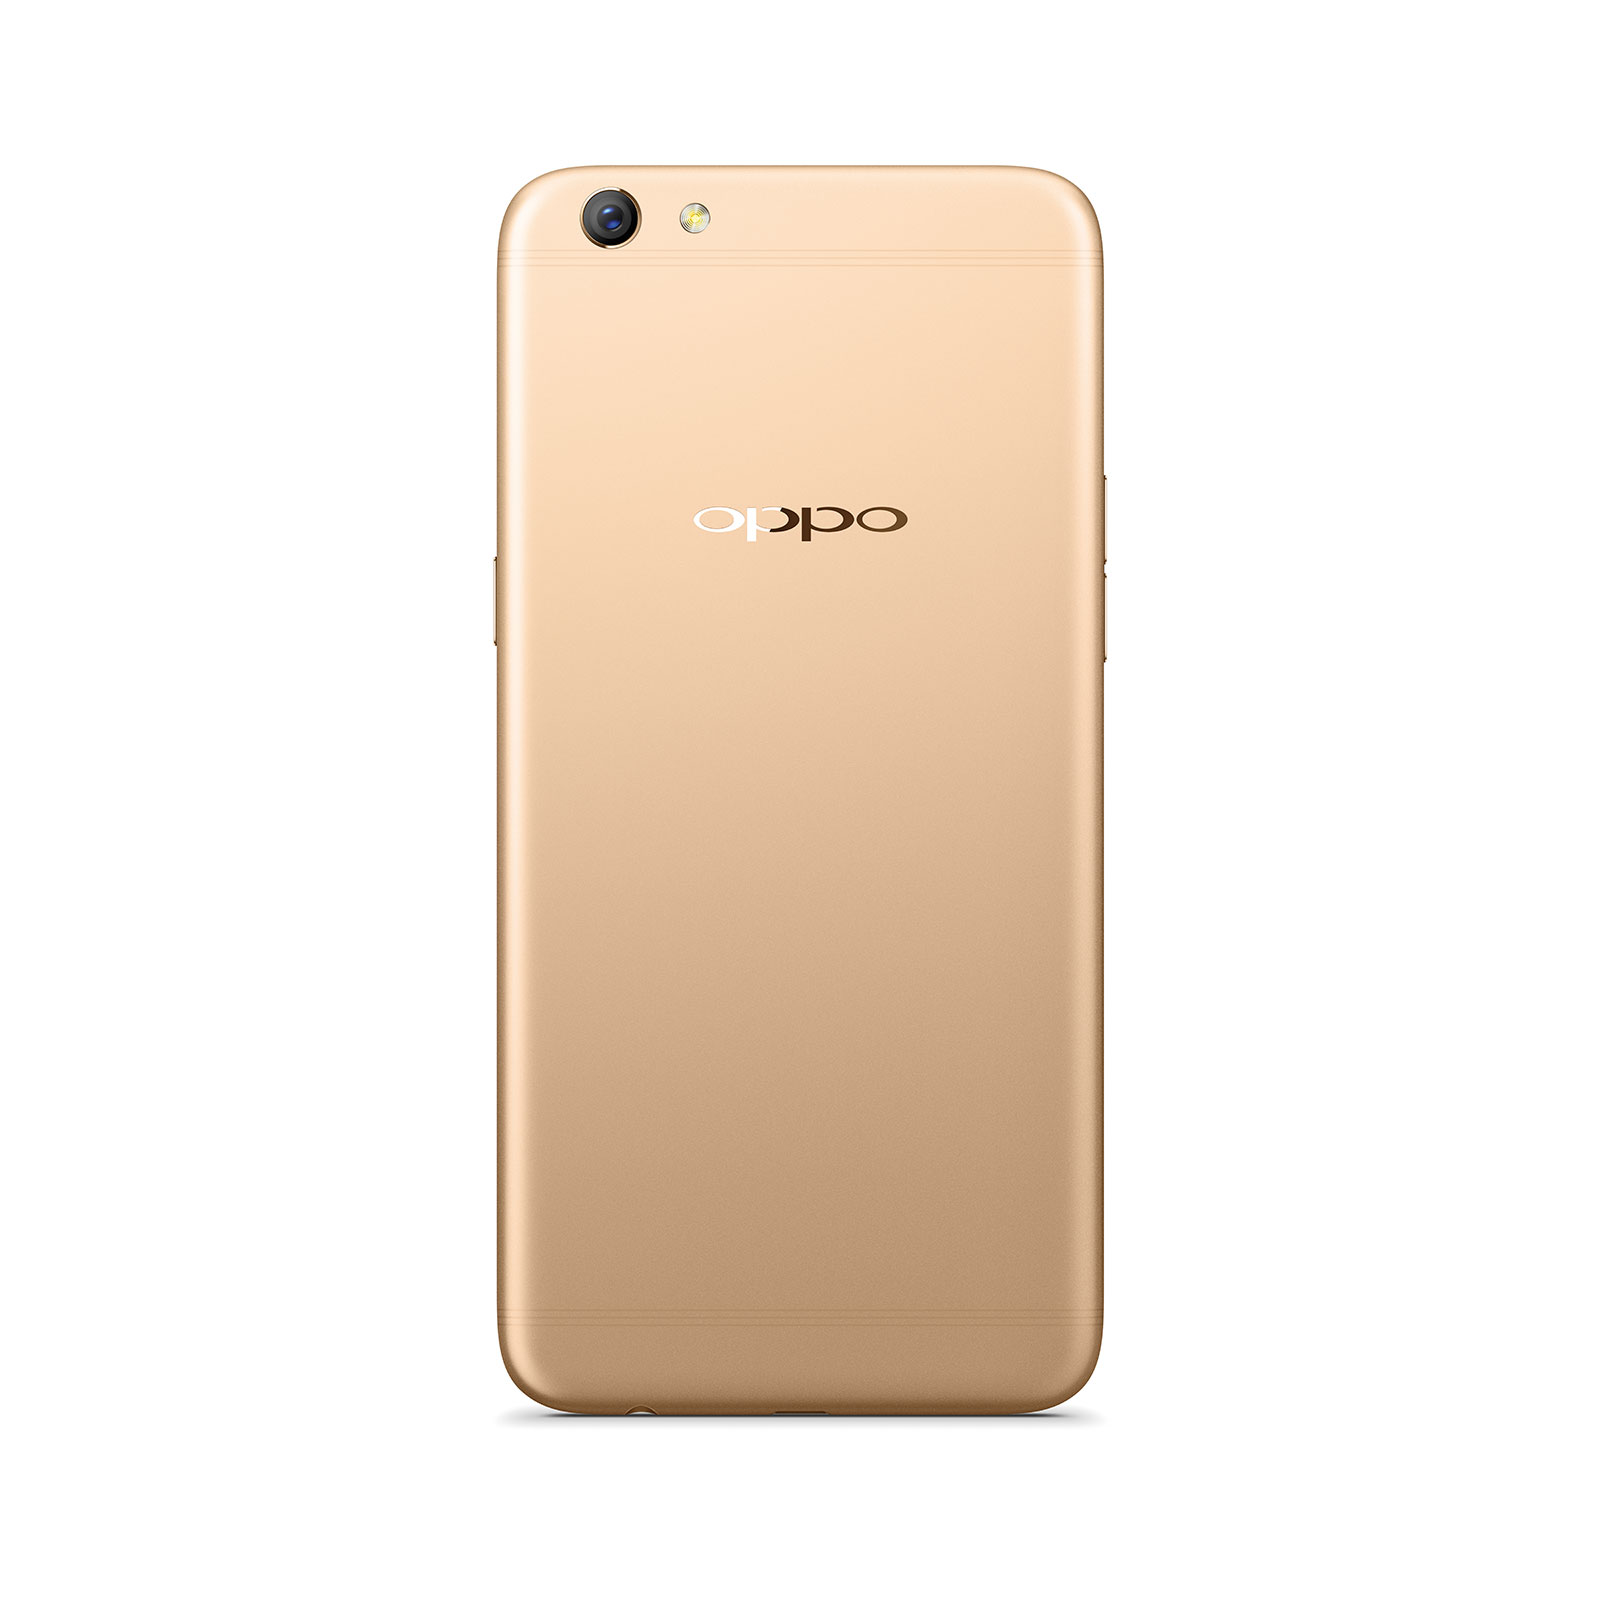 Oppo R9 and R9 Plus smartphones unveiled with 16MP front camera, 4GB RAM